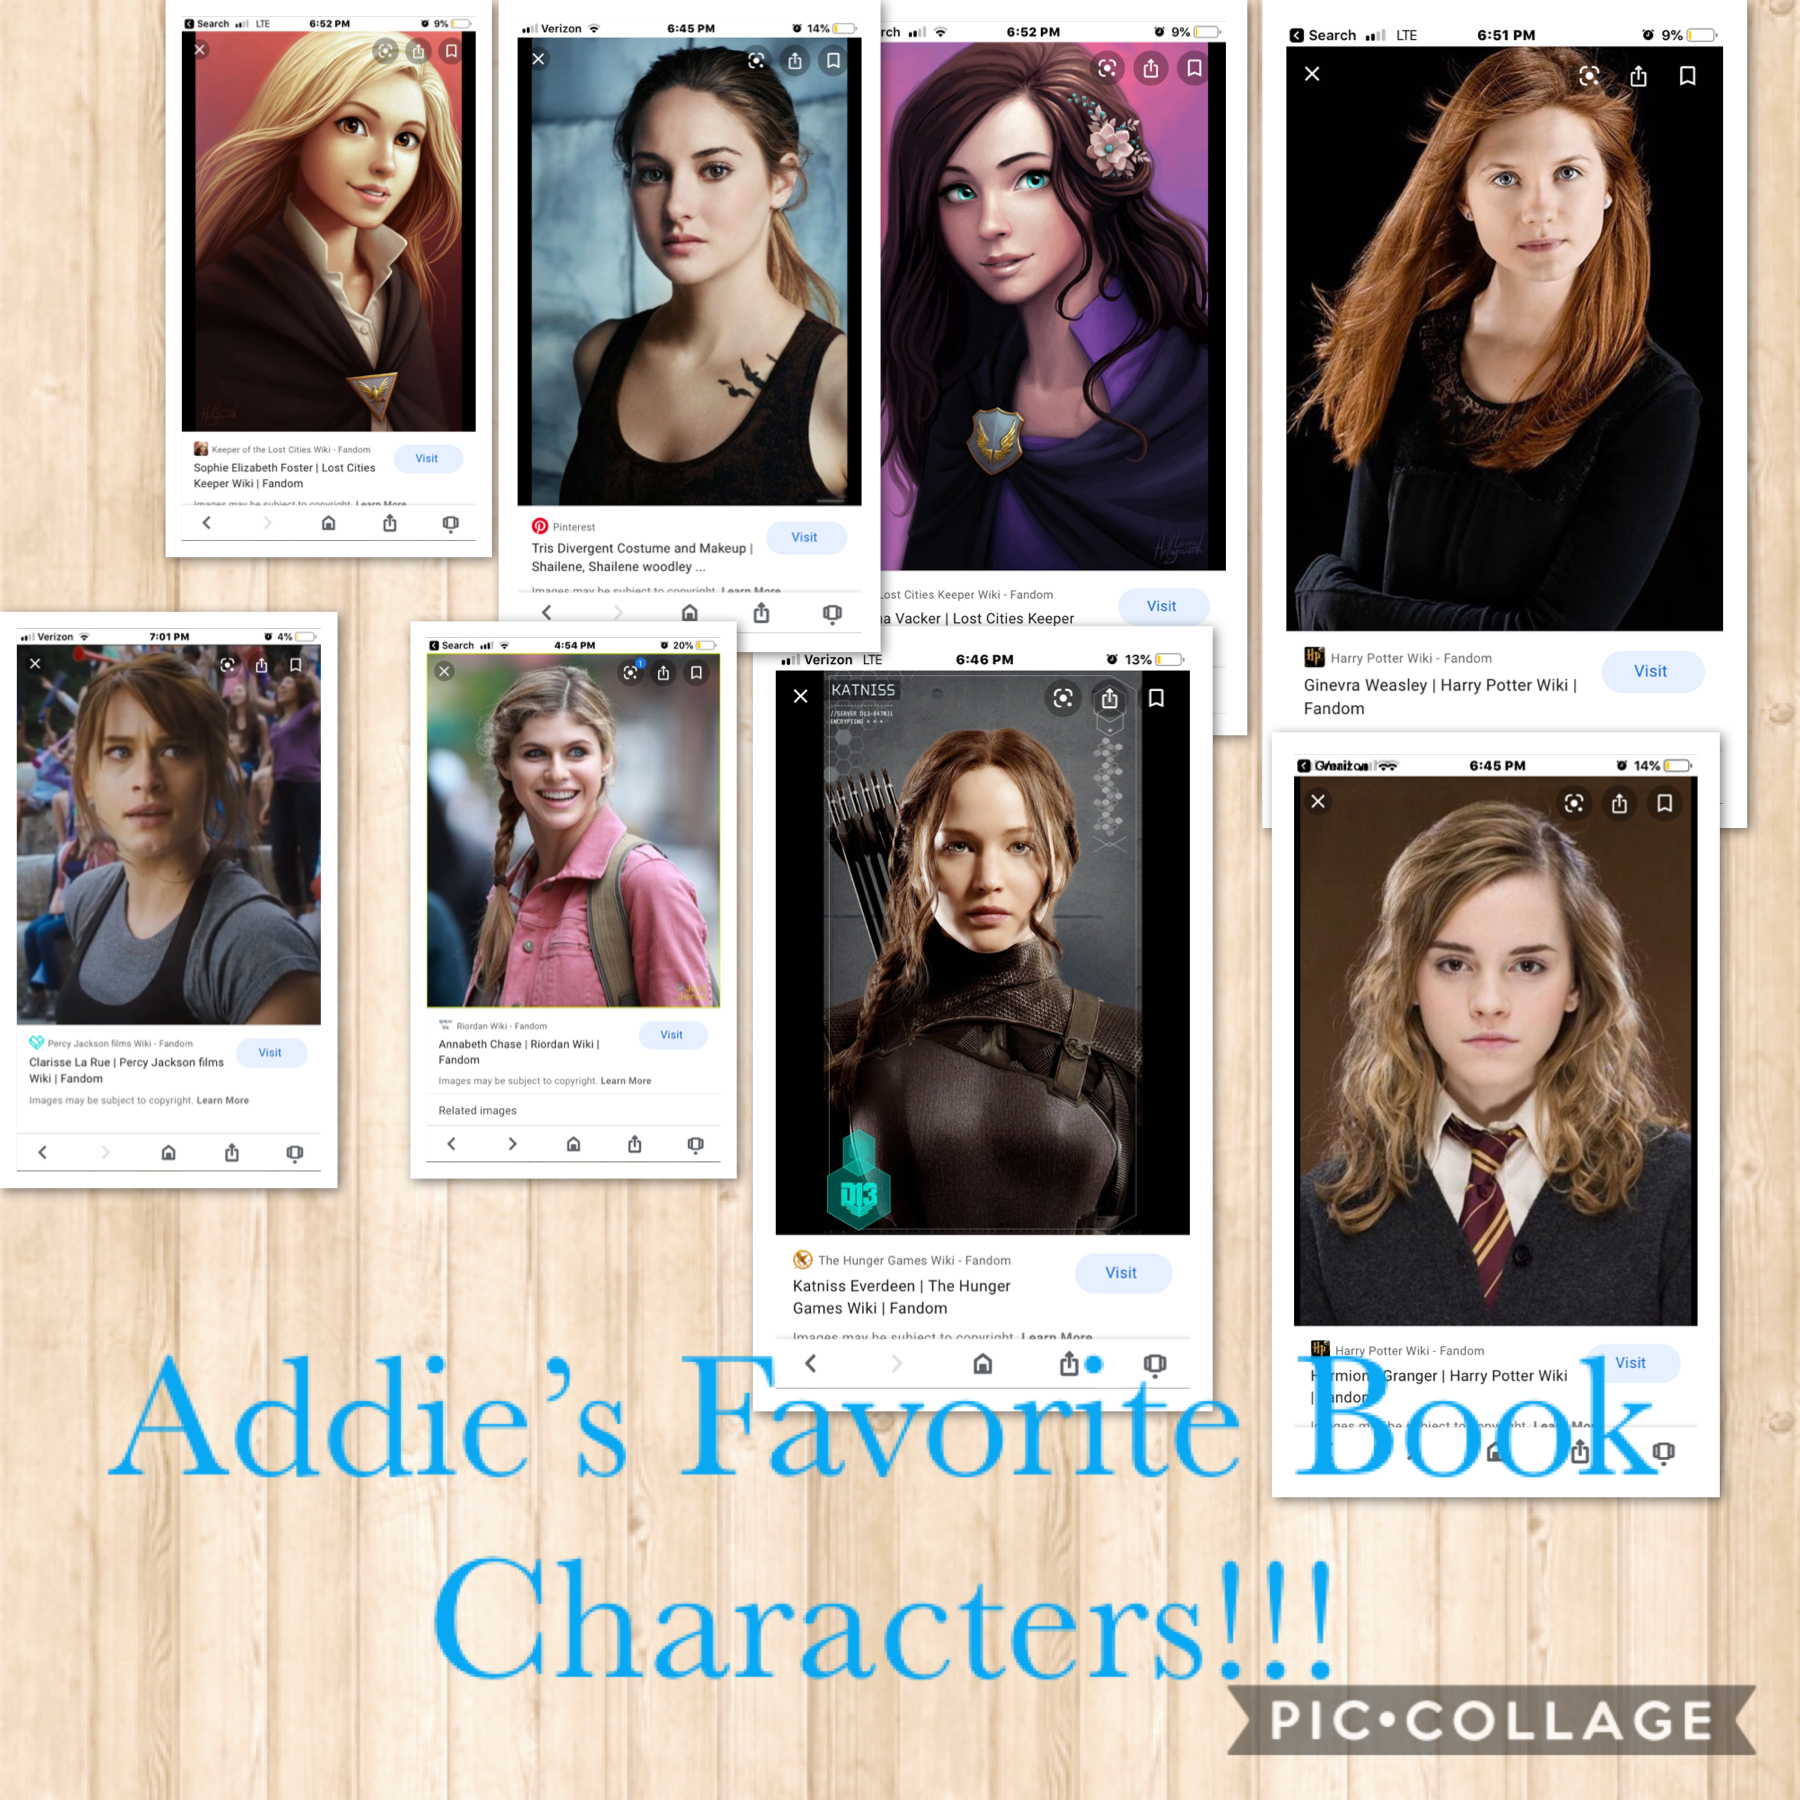 My favorite book characters 💙❤️❣️💕😊💚💜